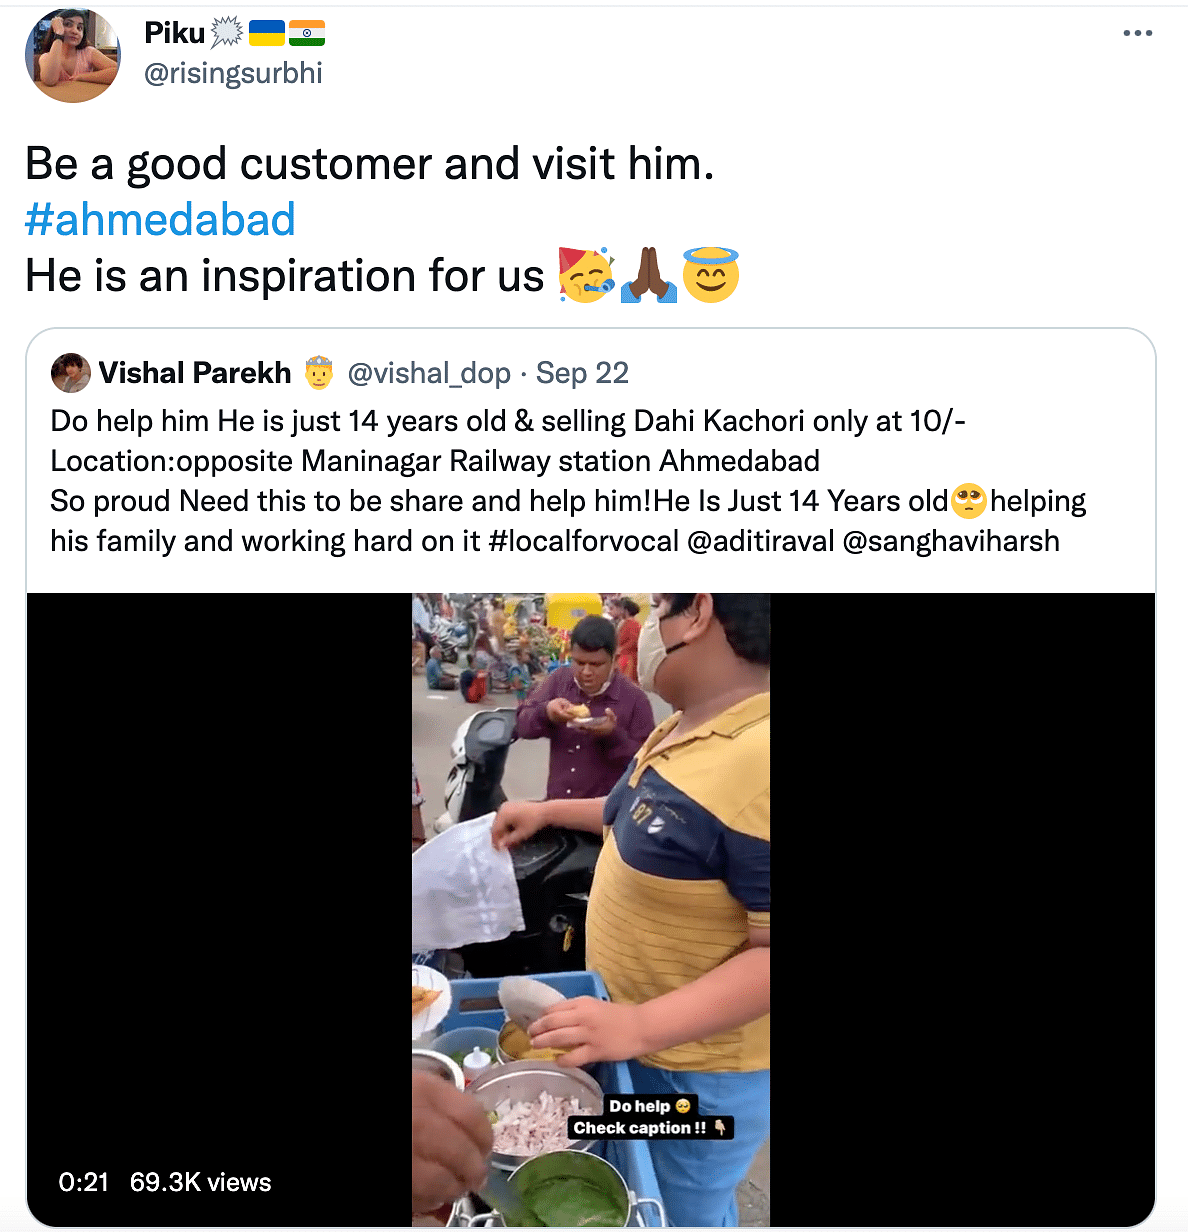 The video of the young boy went viral, and crowds of people flocked to his stall soon after to help him out.